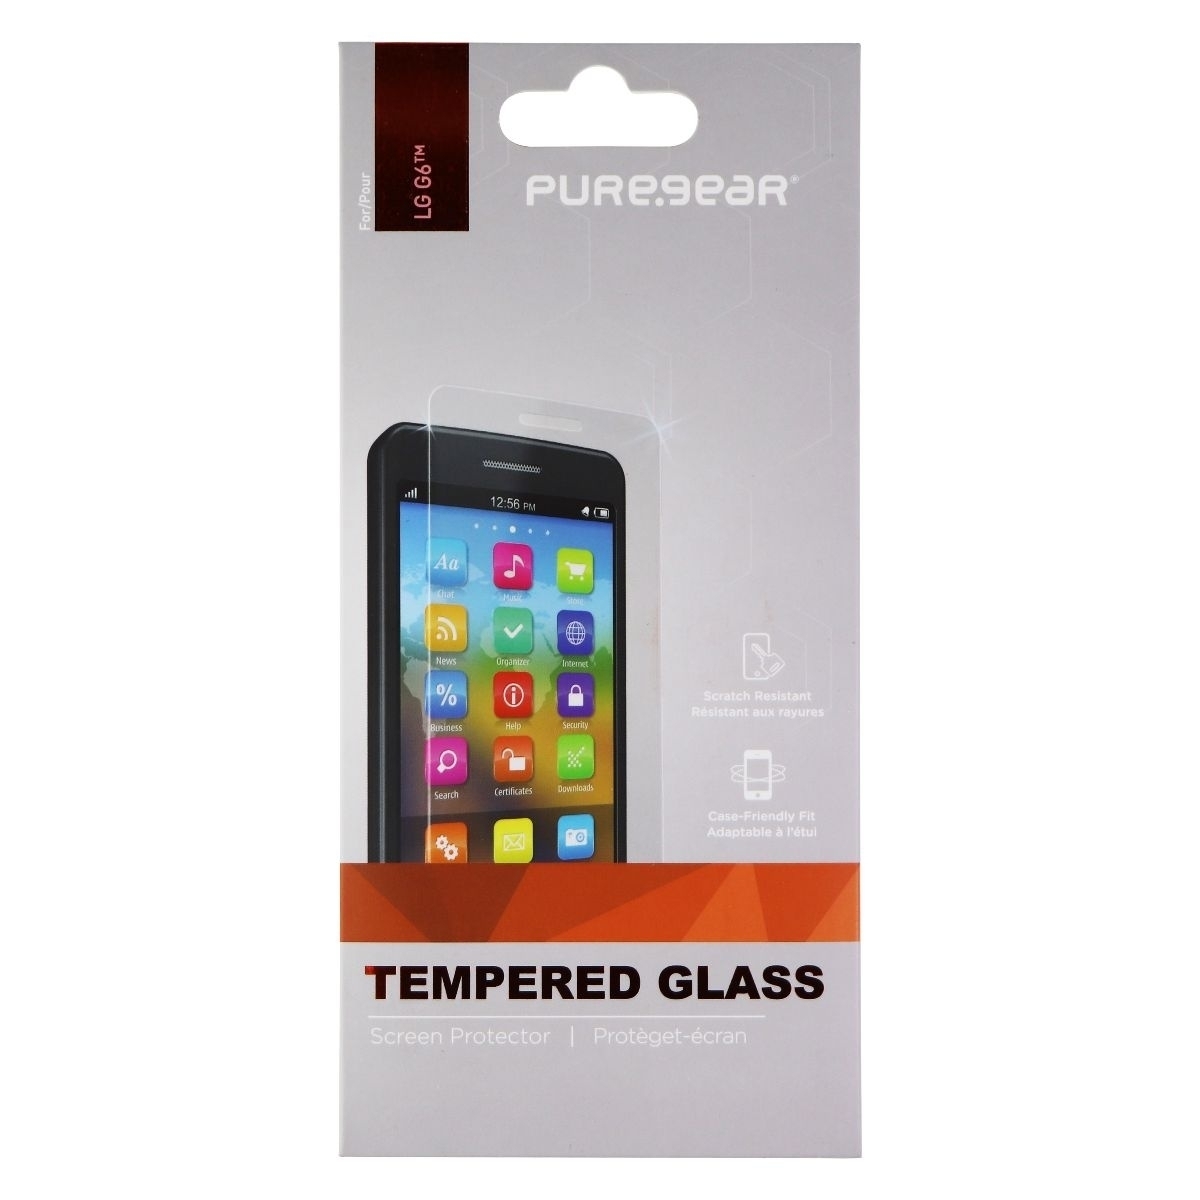 PureGear High Definition Tempered Glass For LG G6 Smartphone - Clear